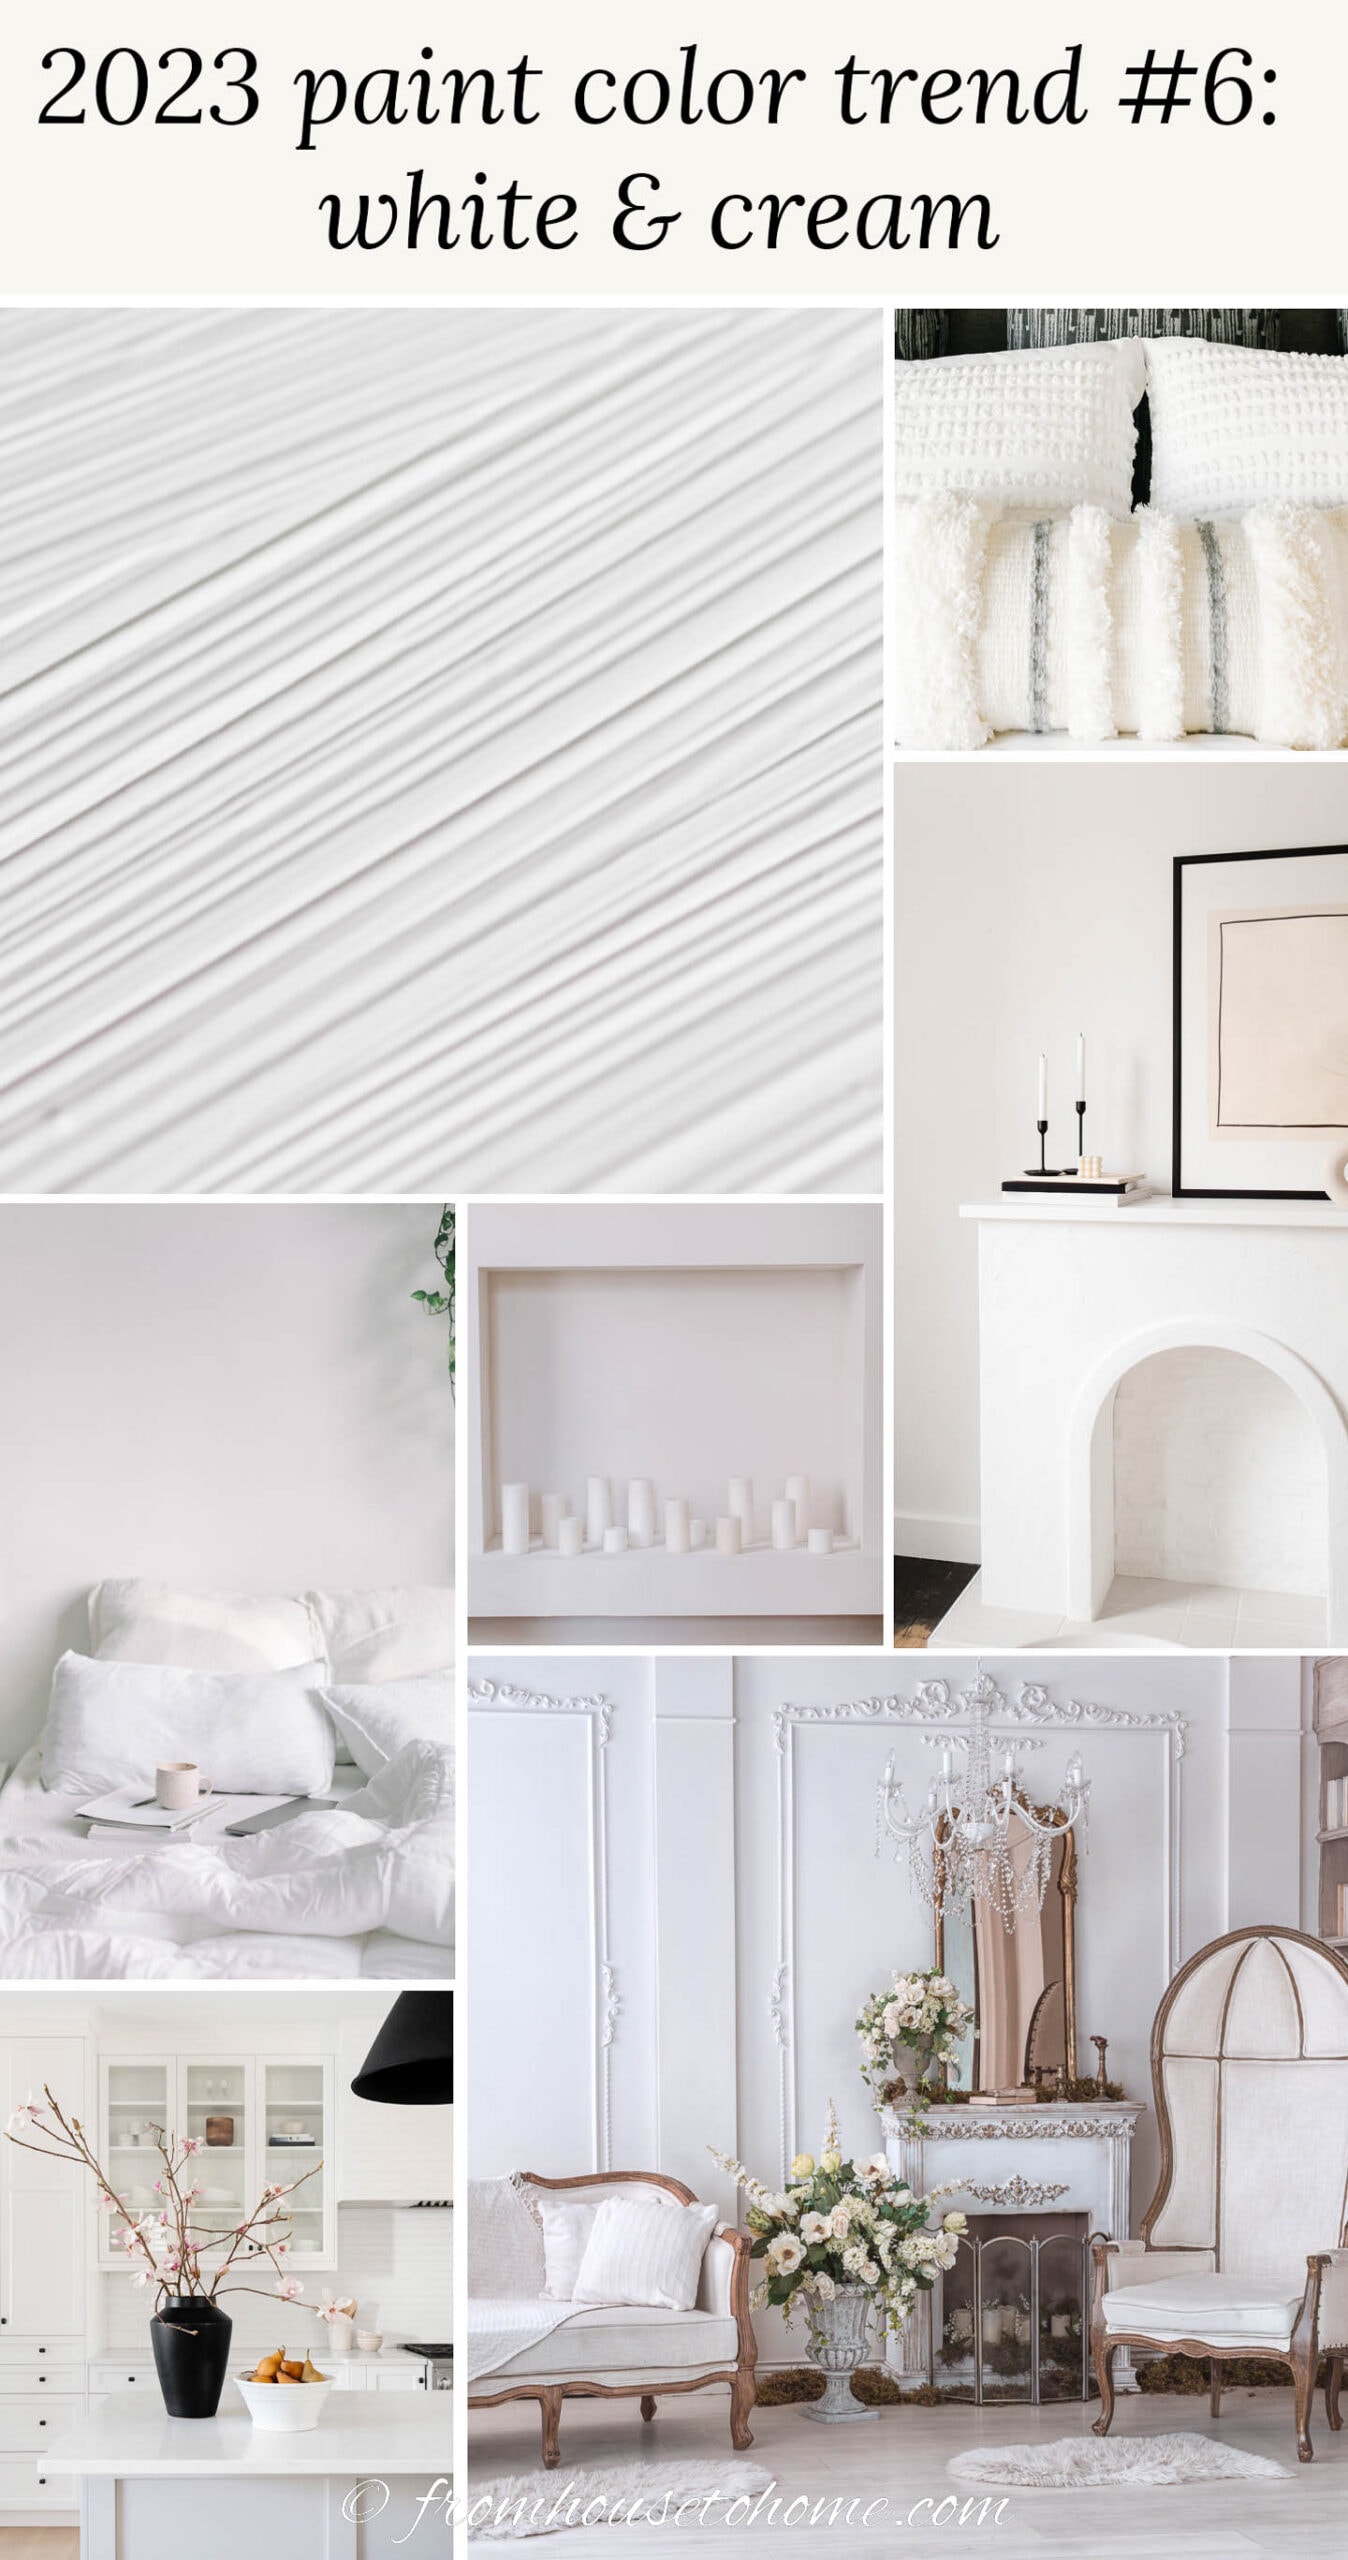 A collage of images using the 2023 paint color trend - whites and creams